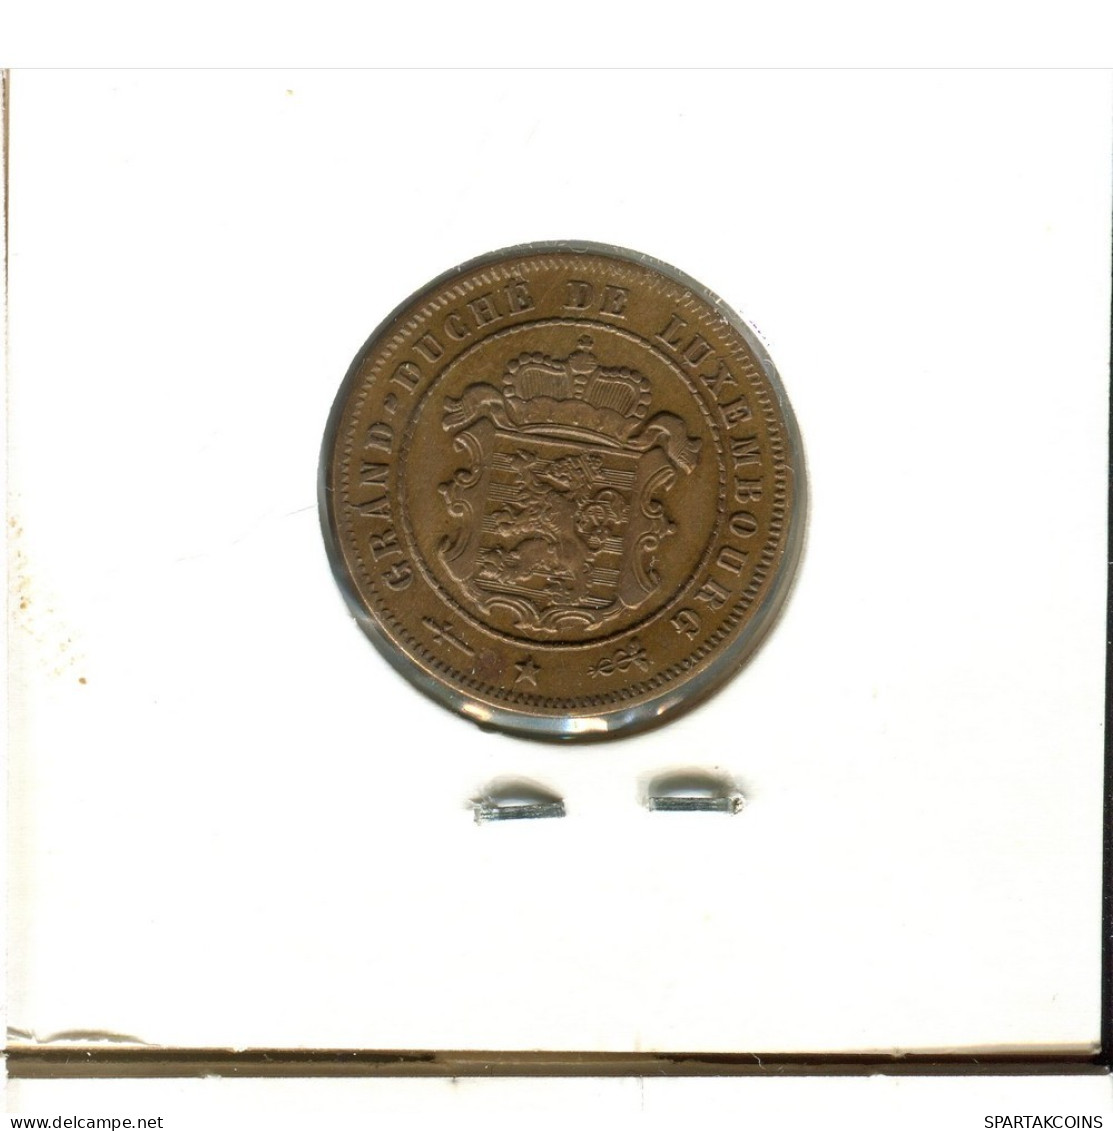 2 1/2 CENTIMES 1908 LUXEMBOURG Coin #AT172.U.A - Luxembourg